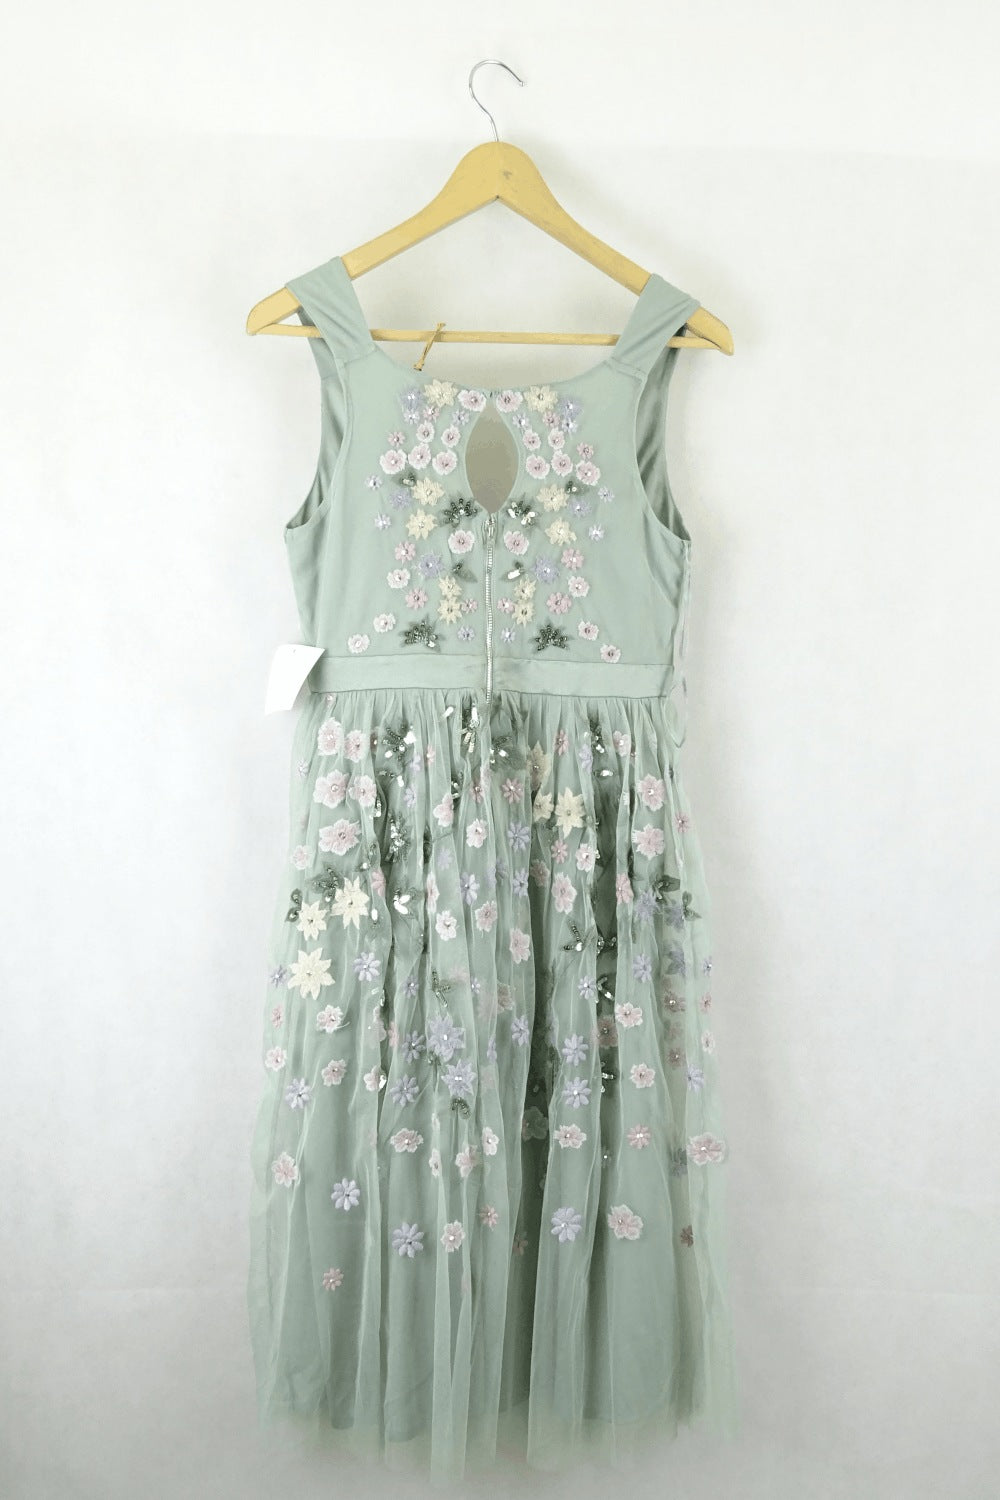 Maya Deluxe Petite Green Embroided Dress  8